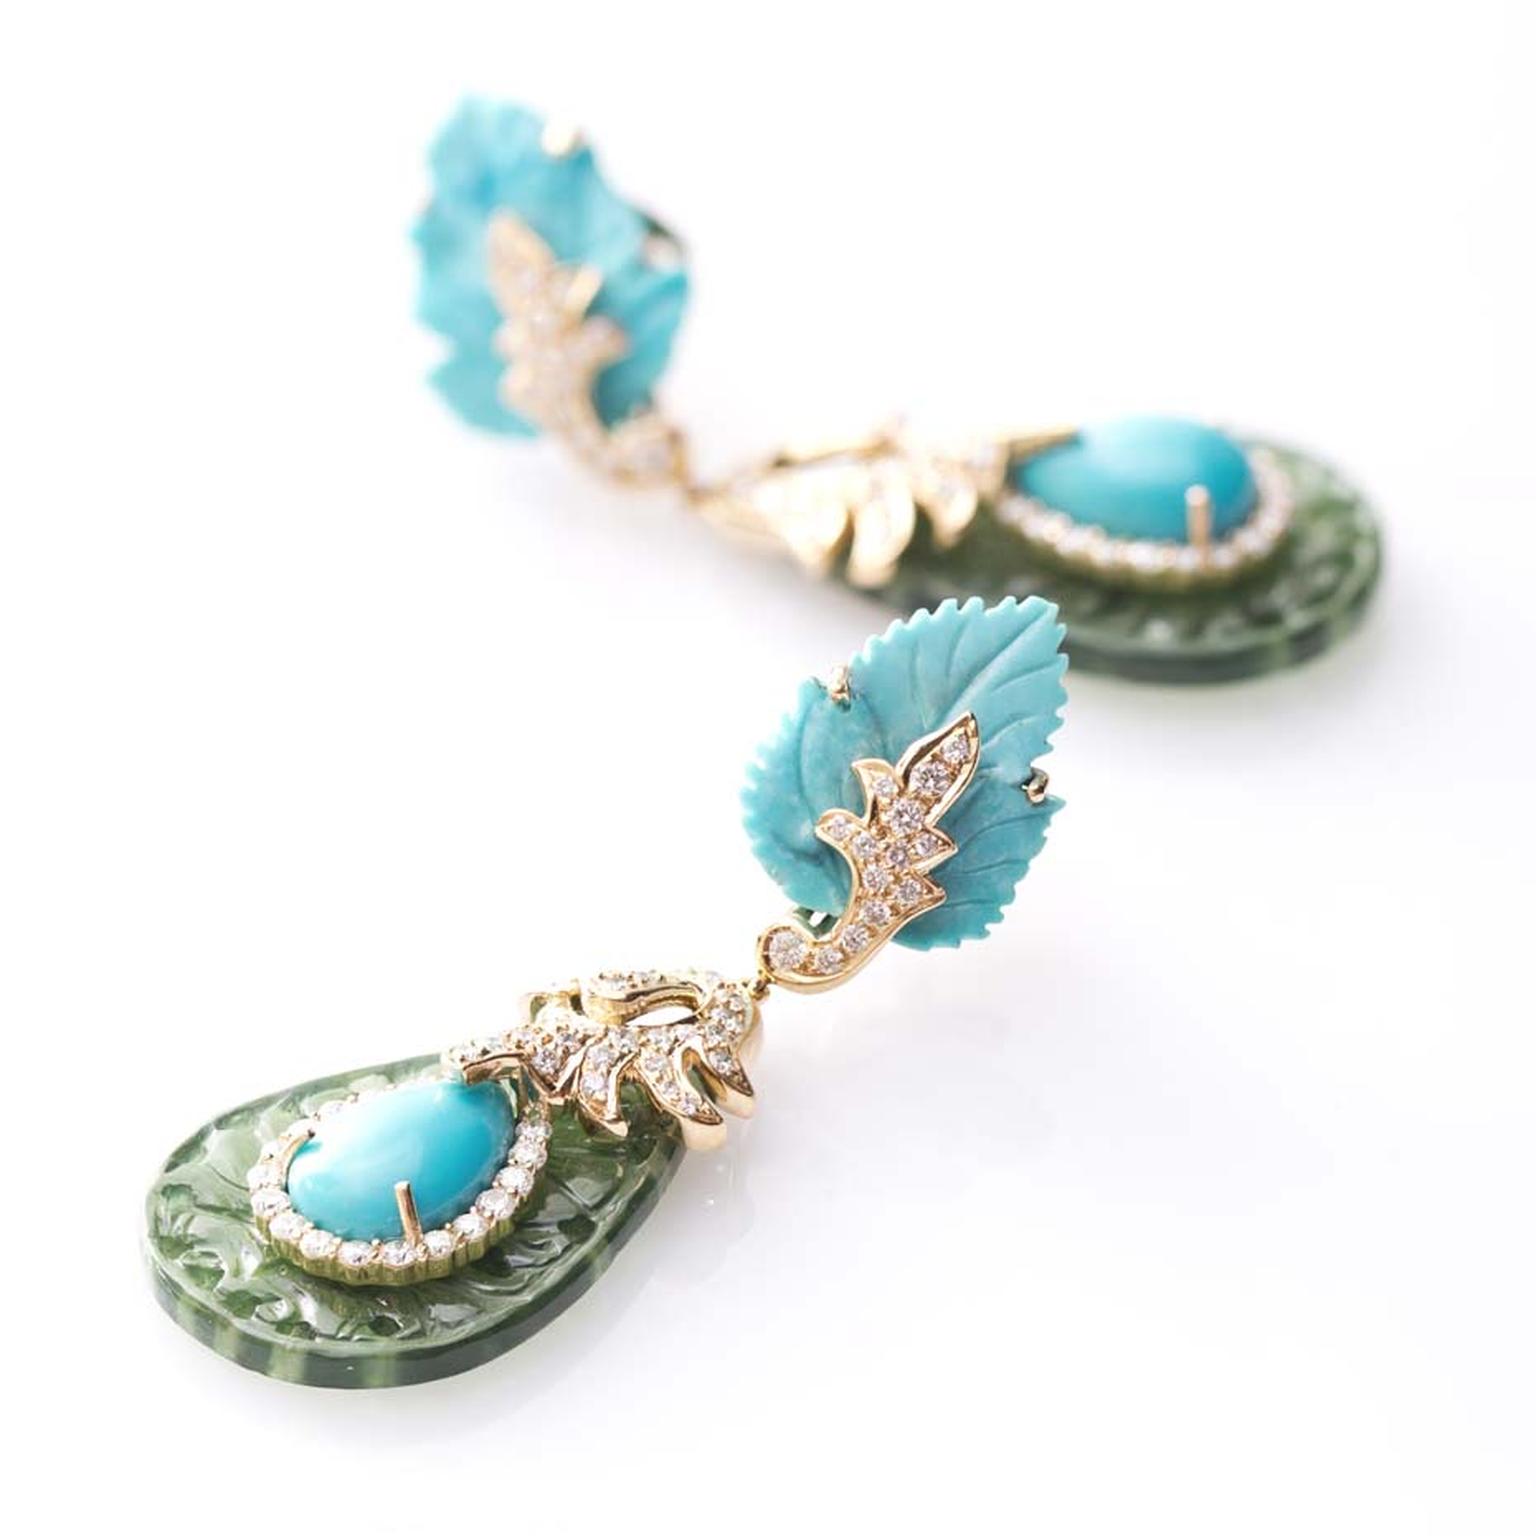 Carved turquoise and serpentine Farah Khan earrings accented by diamonds and set in gold, from the Le Jardin Exotique collection.